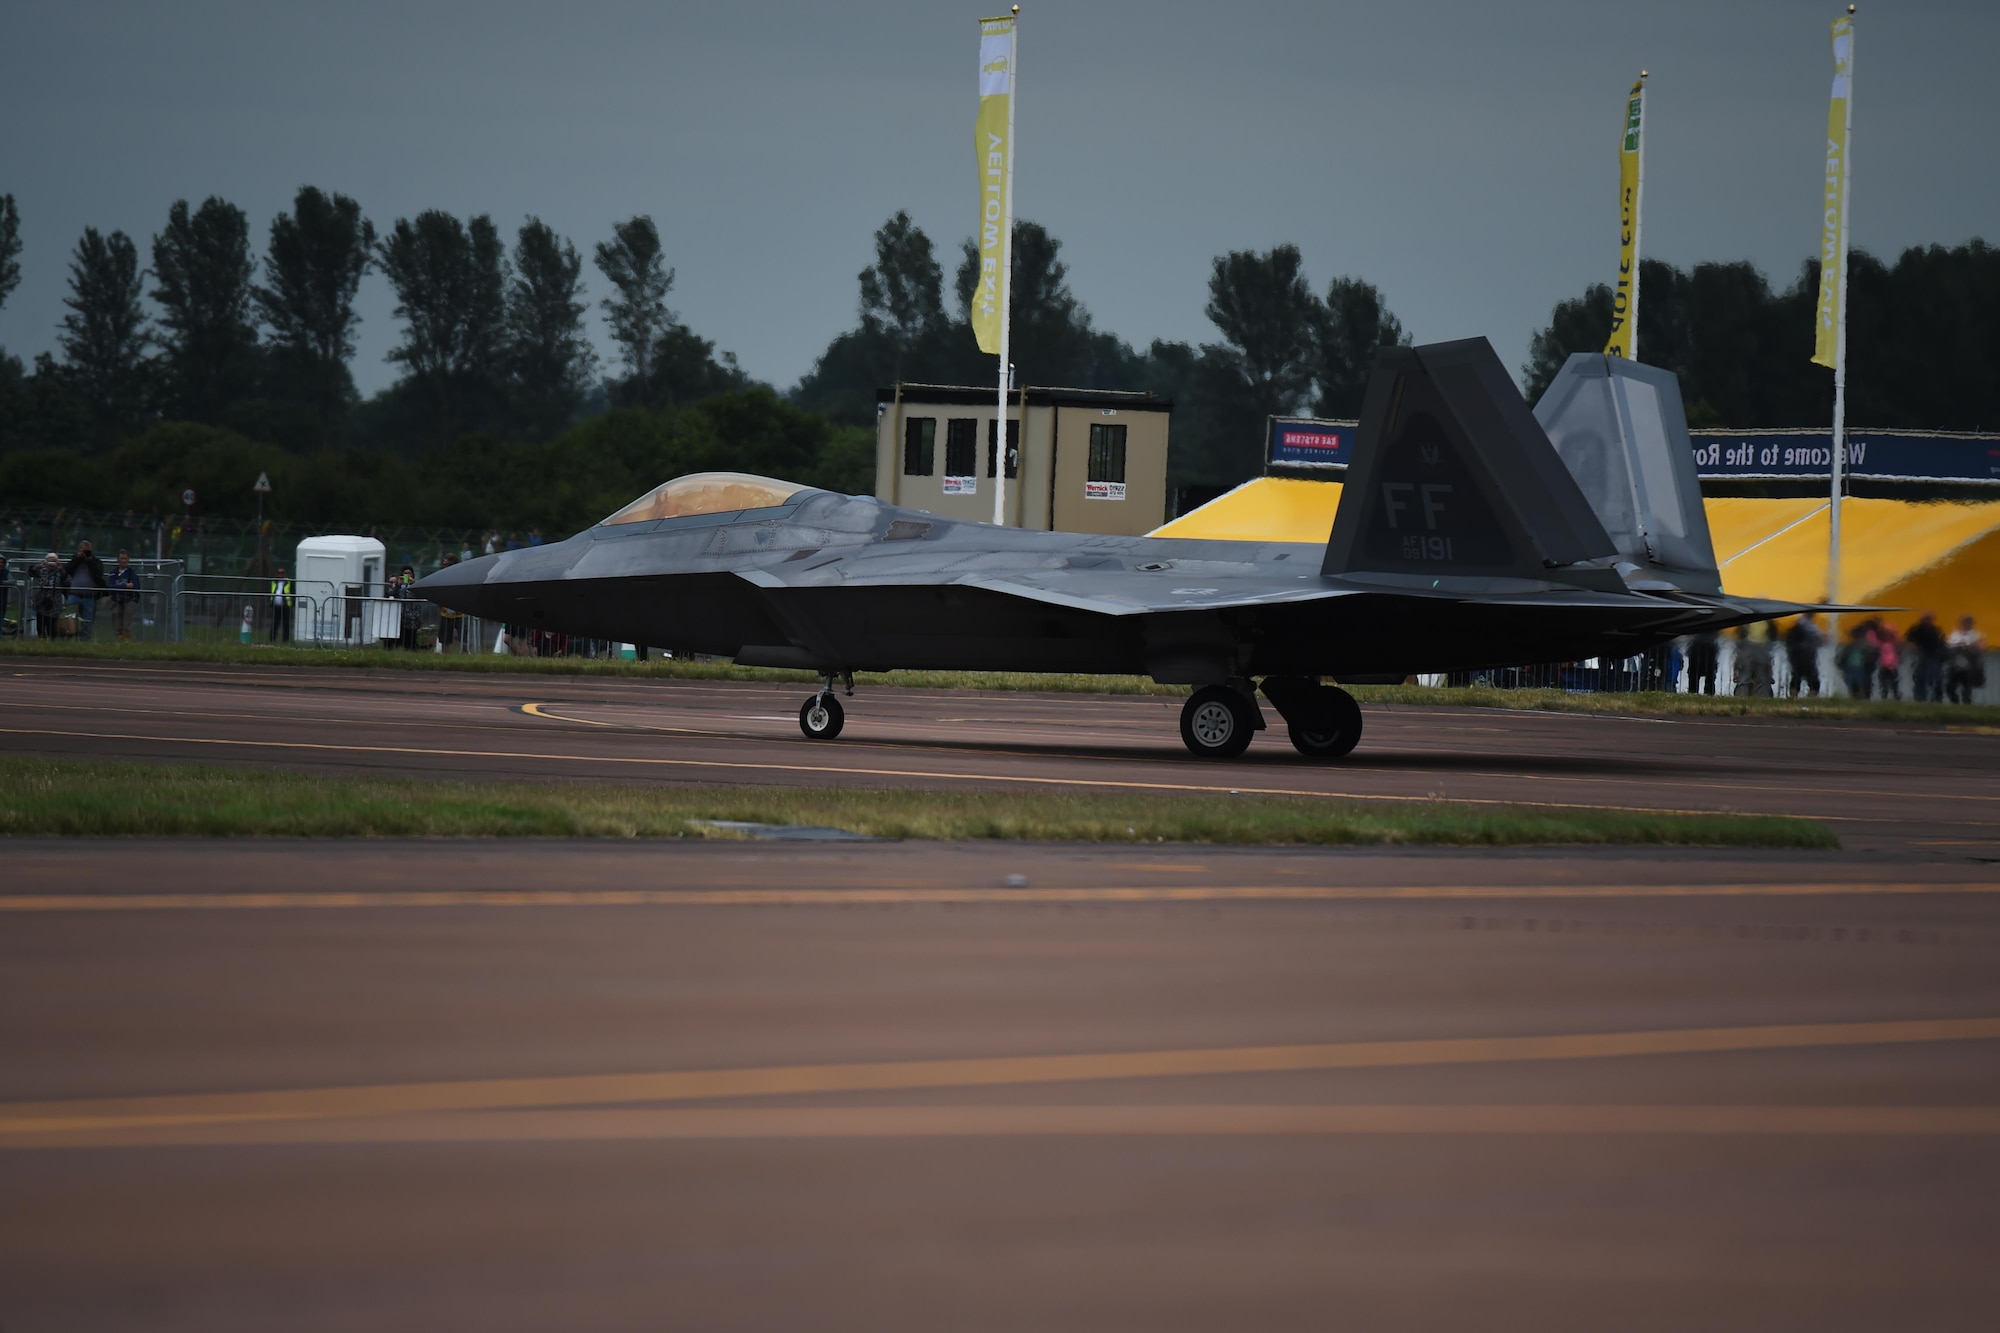 A F-22 Raptor, with the Raptor Demonstration Team, taxis past onlookers prior to its performance at the Royal International Air Tattoo, hosted on RAF Fairford, July 8-10, 2016. RIAT 16 afforded an opportunity for new aircraft, like the F-35 Lightning II, to be displayed alongside crowd favorites and provided a weekend of fun and entertainment for the projected 160,000 visitors. (U.S. Air Force photo by Airman 1st Class Zachary Bumpus/Released)